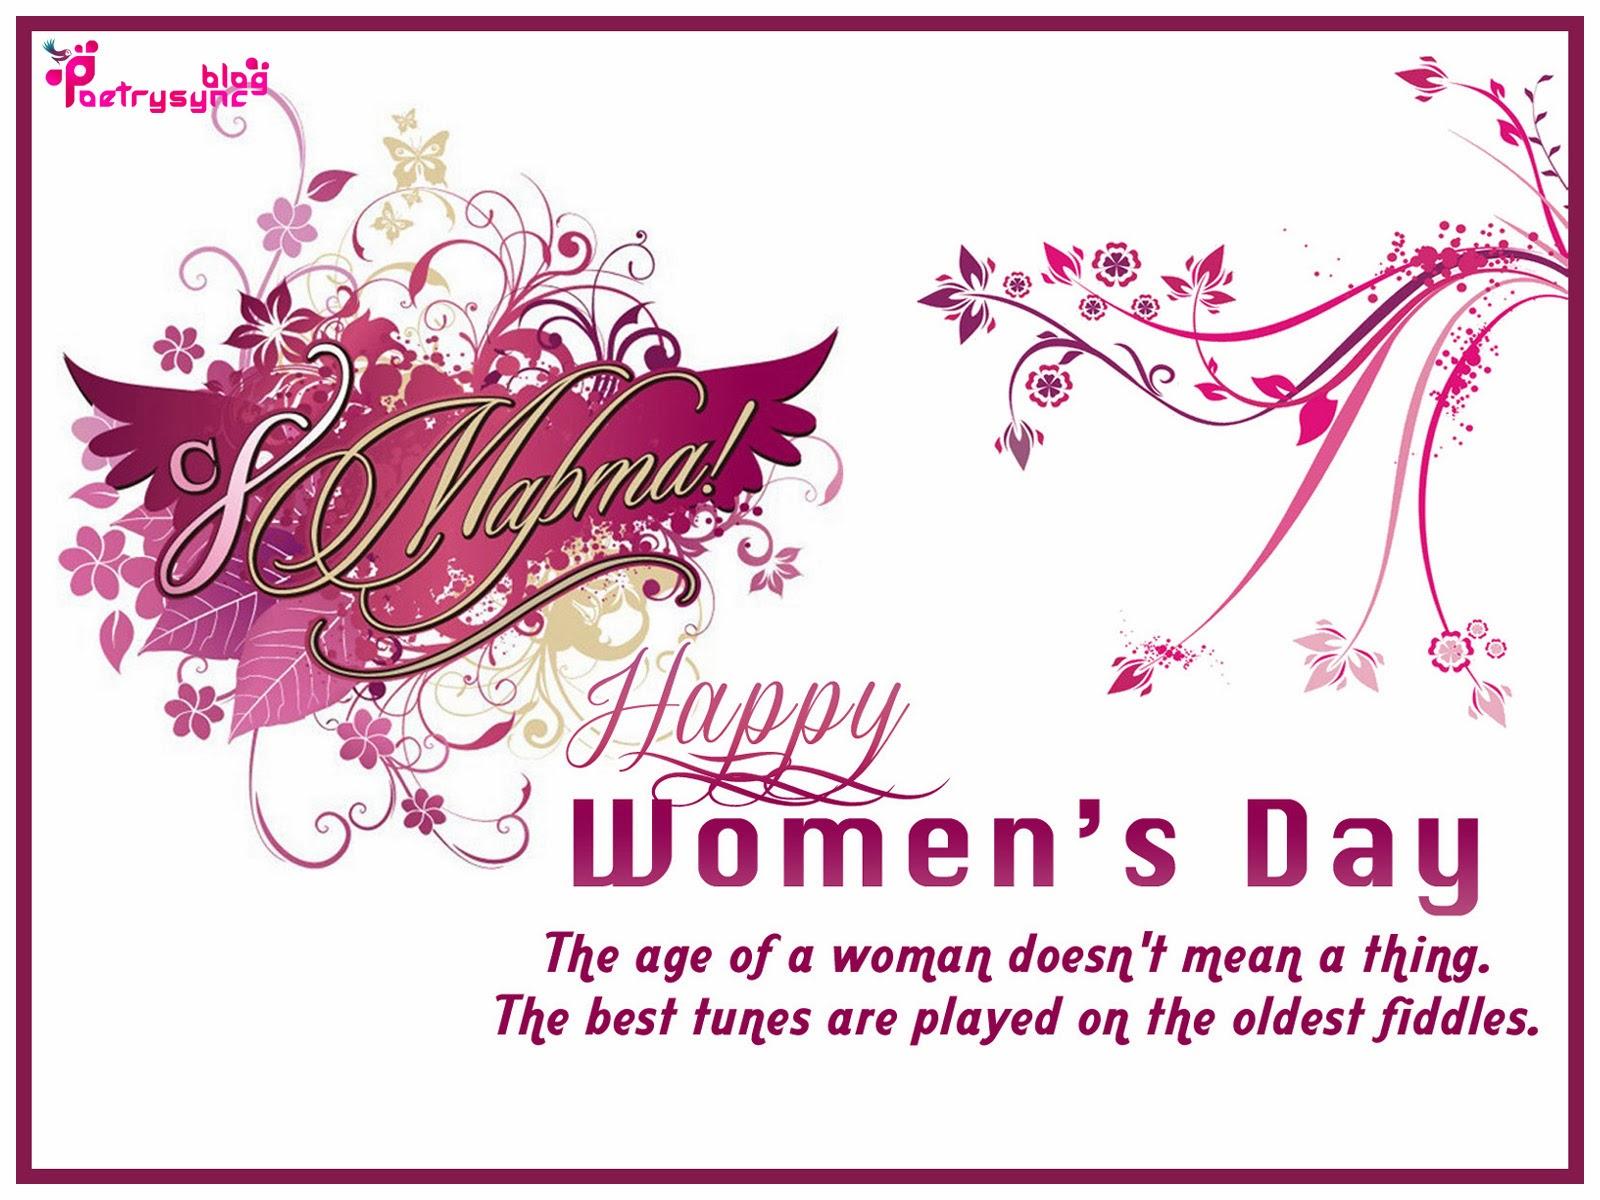 Happy women's day HD image wishes quotes pics for whatsapp